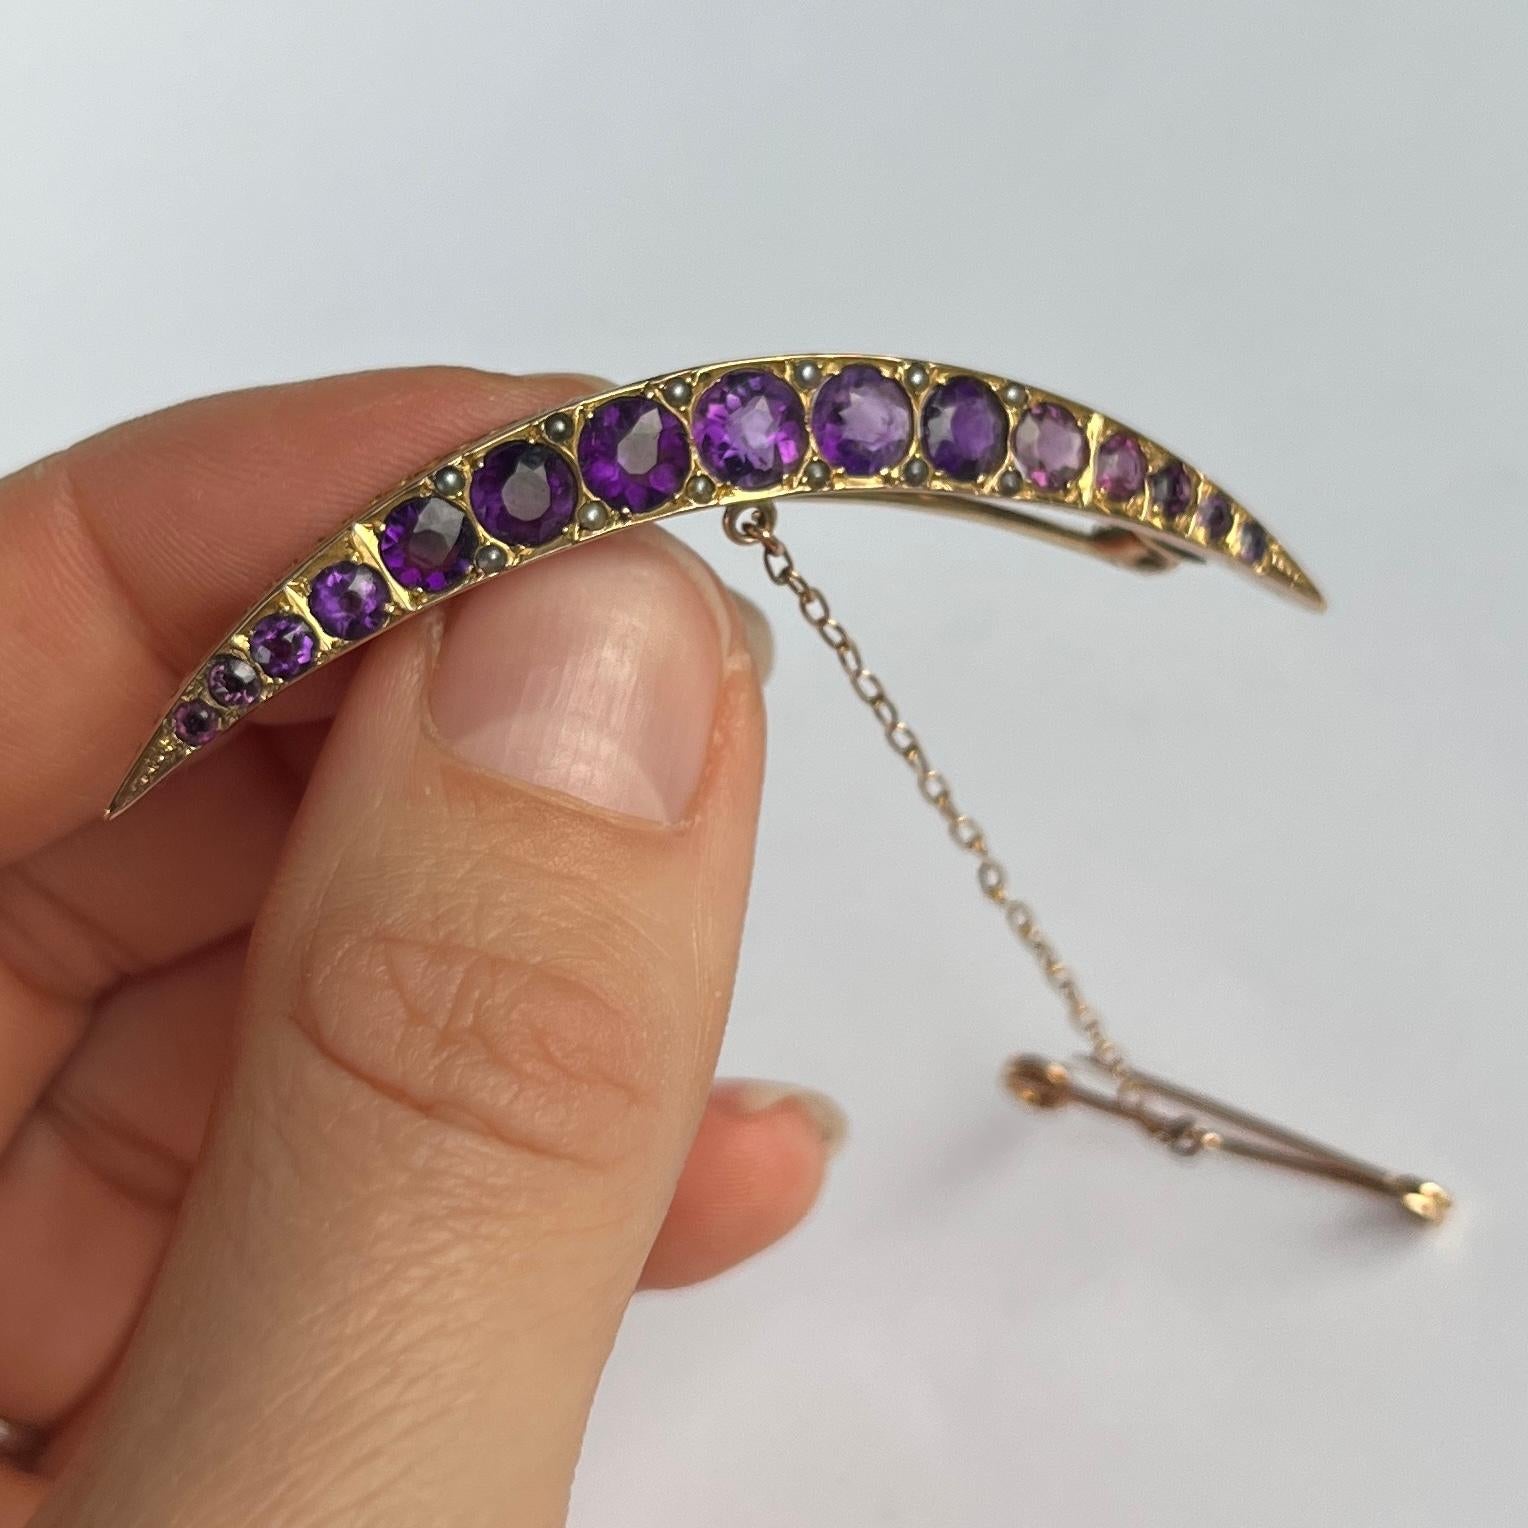 This stylish crescent brooch holds a total of 15 amethyst. The brooch is modelled out of 9carat gold. Stone diameter vary from 5.5-1.5mm.


Brooch Dimensions: 6x1.5cm

Weight: 5g